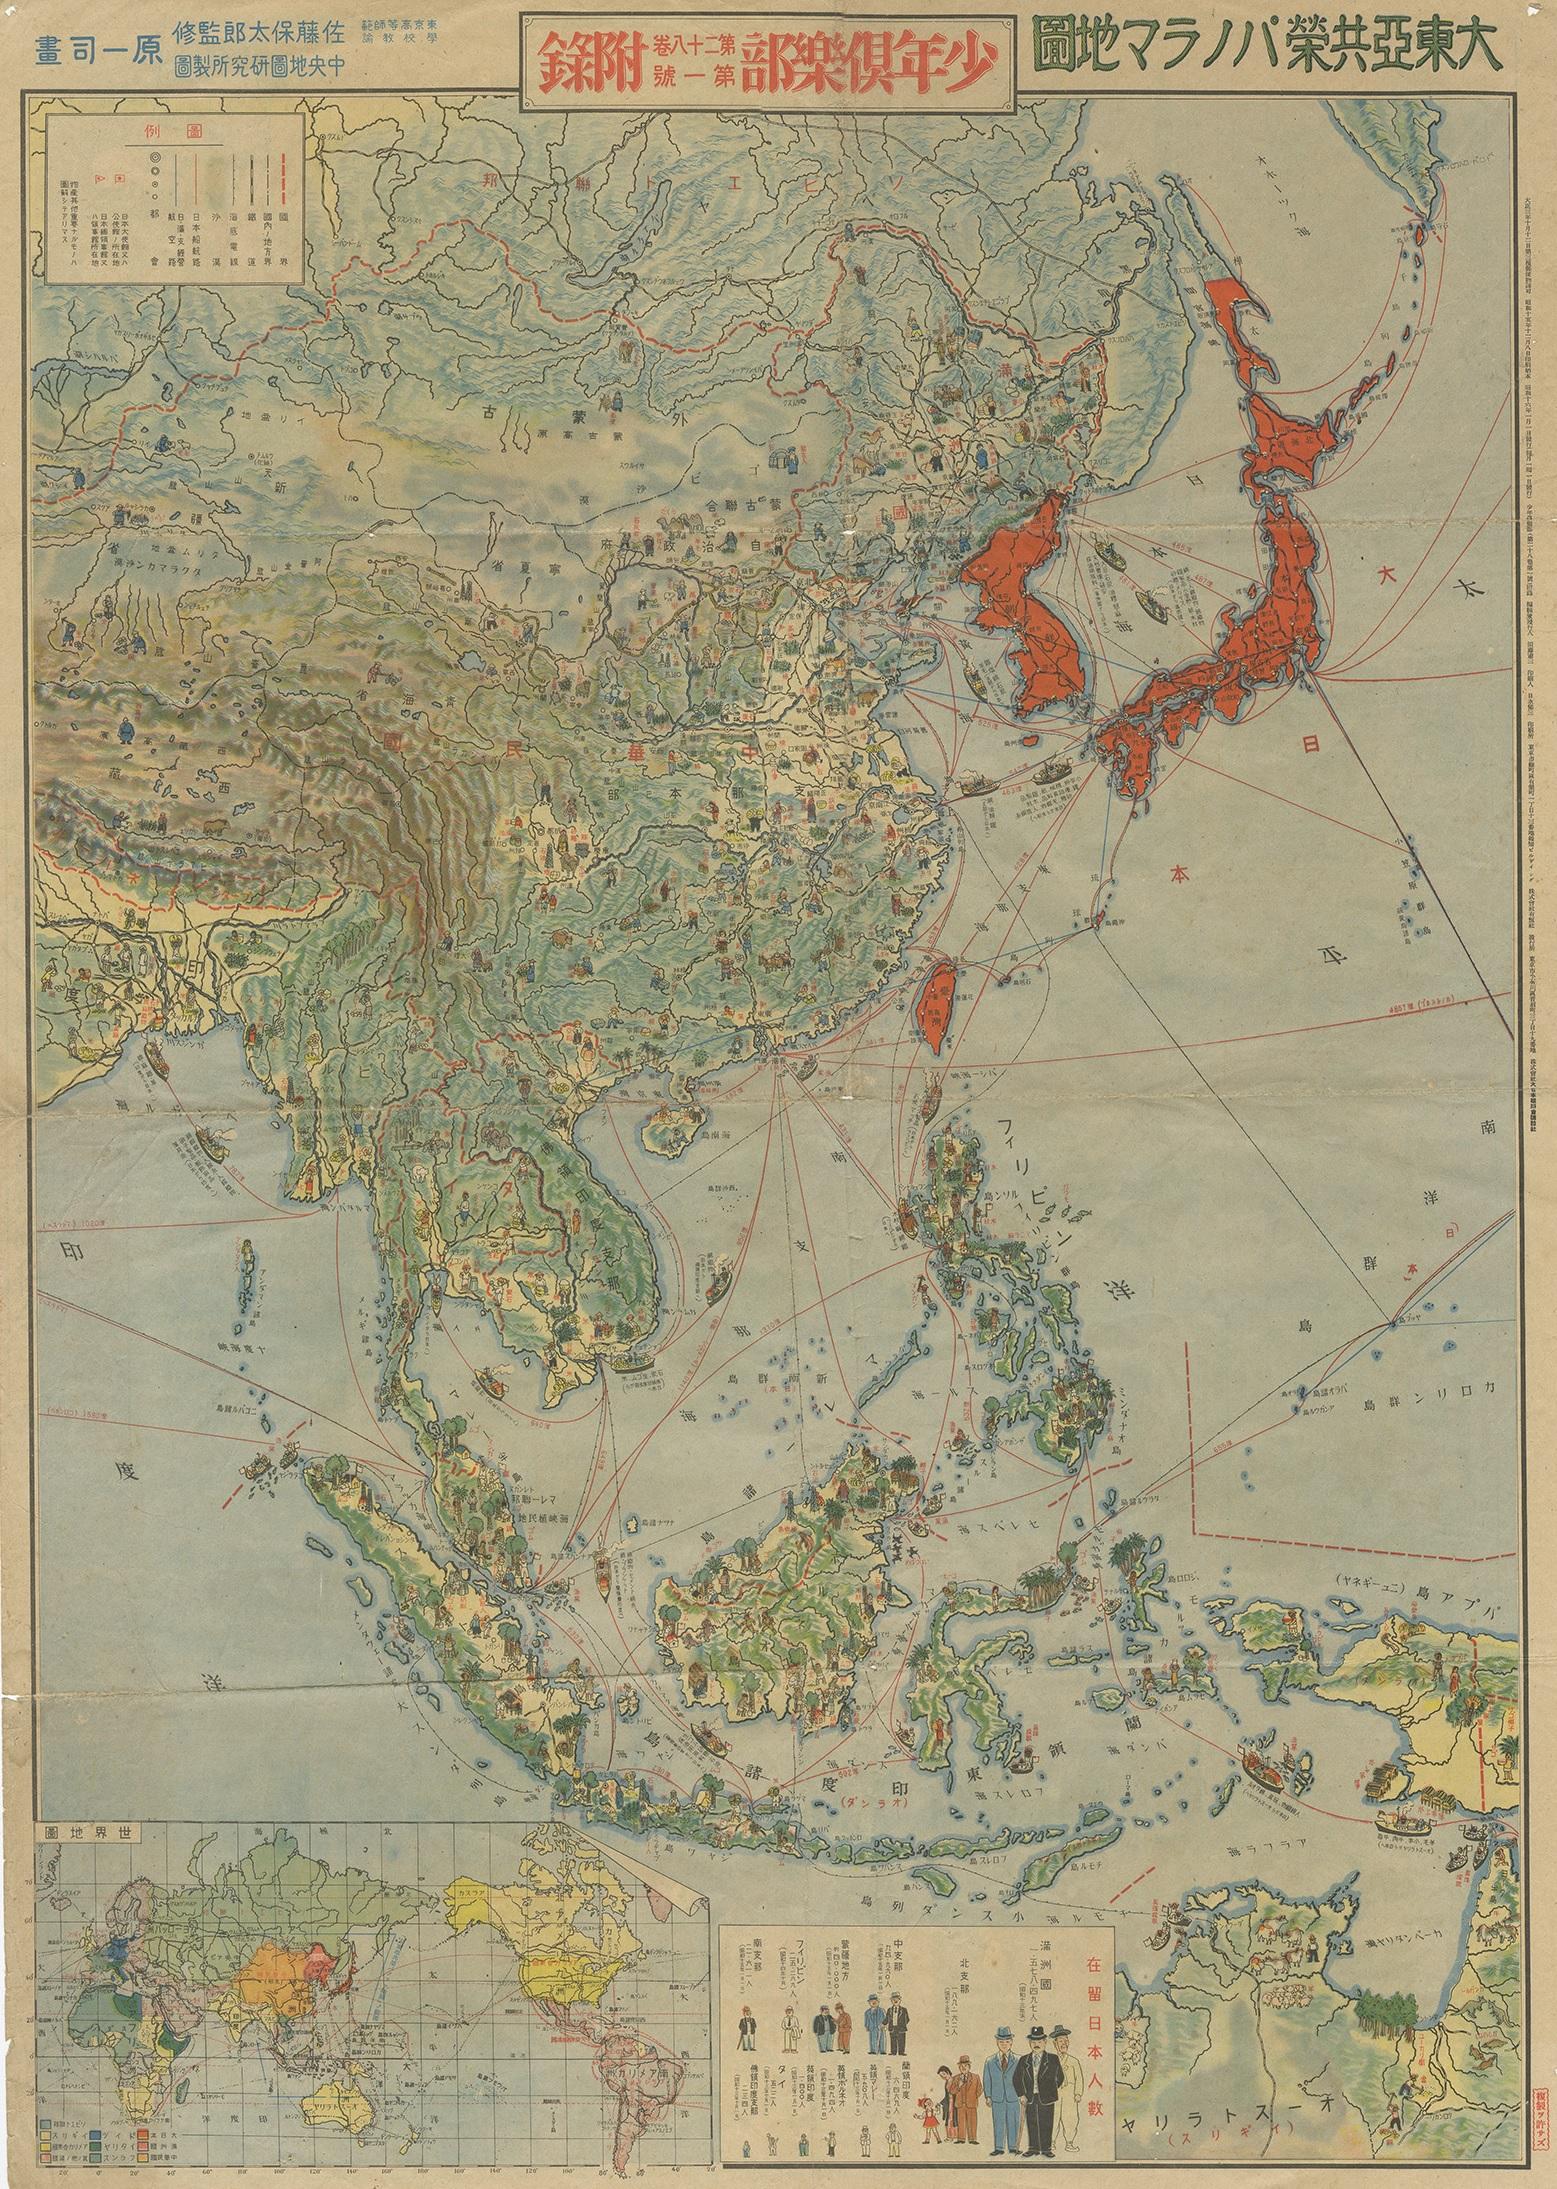 Very rare propaganda map of China, Korea and Japan. It shows the extent of Japanese expansionism in Asia during WW2 and the resources that would fuel the war effort.